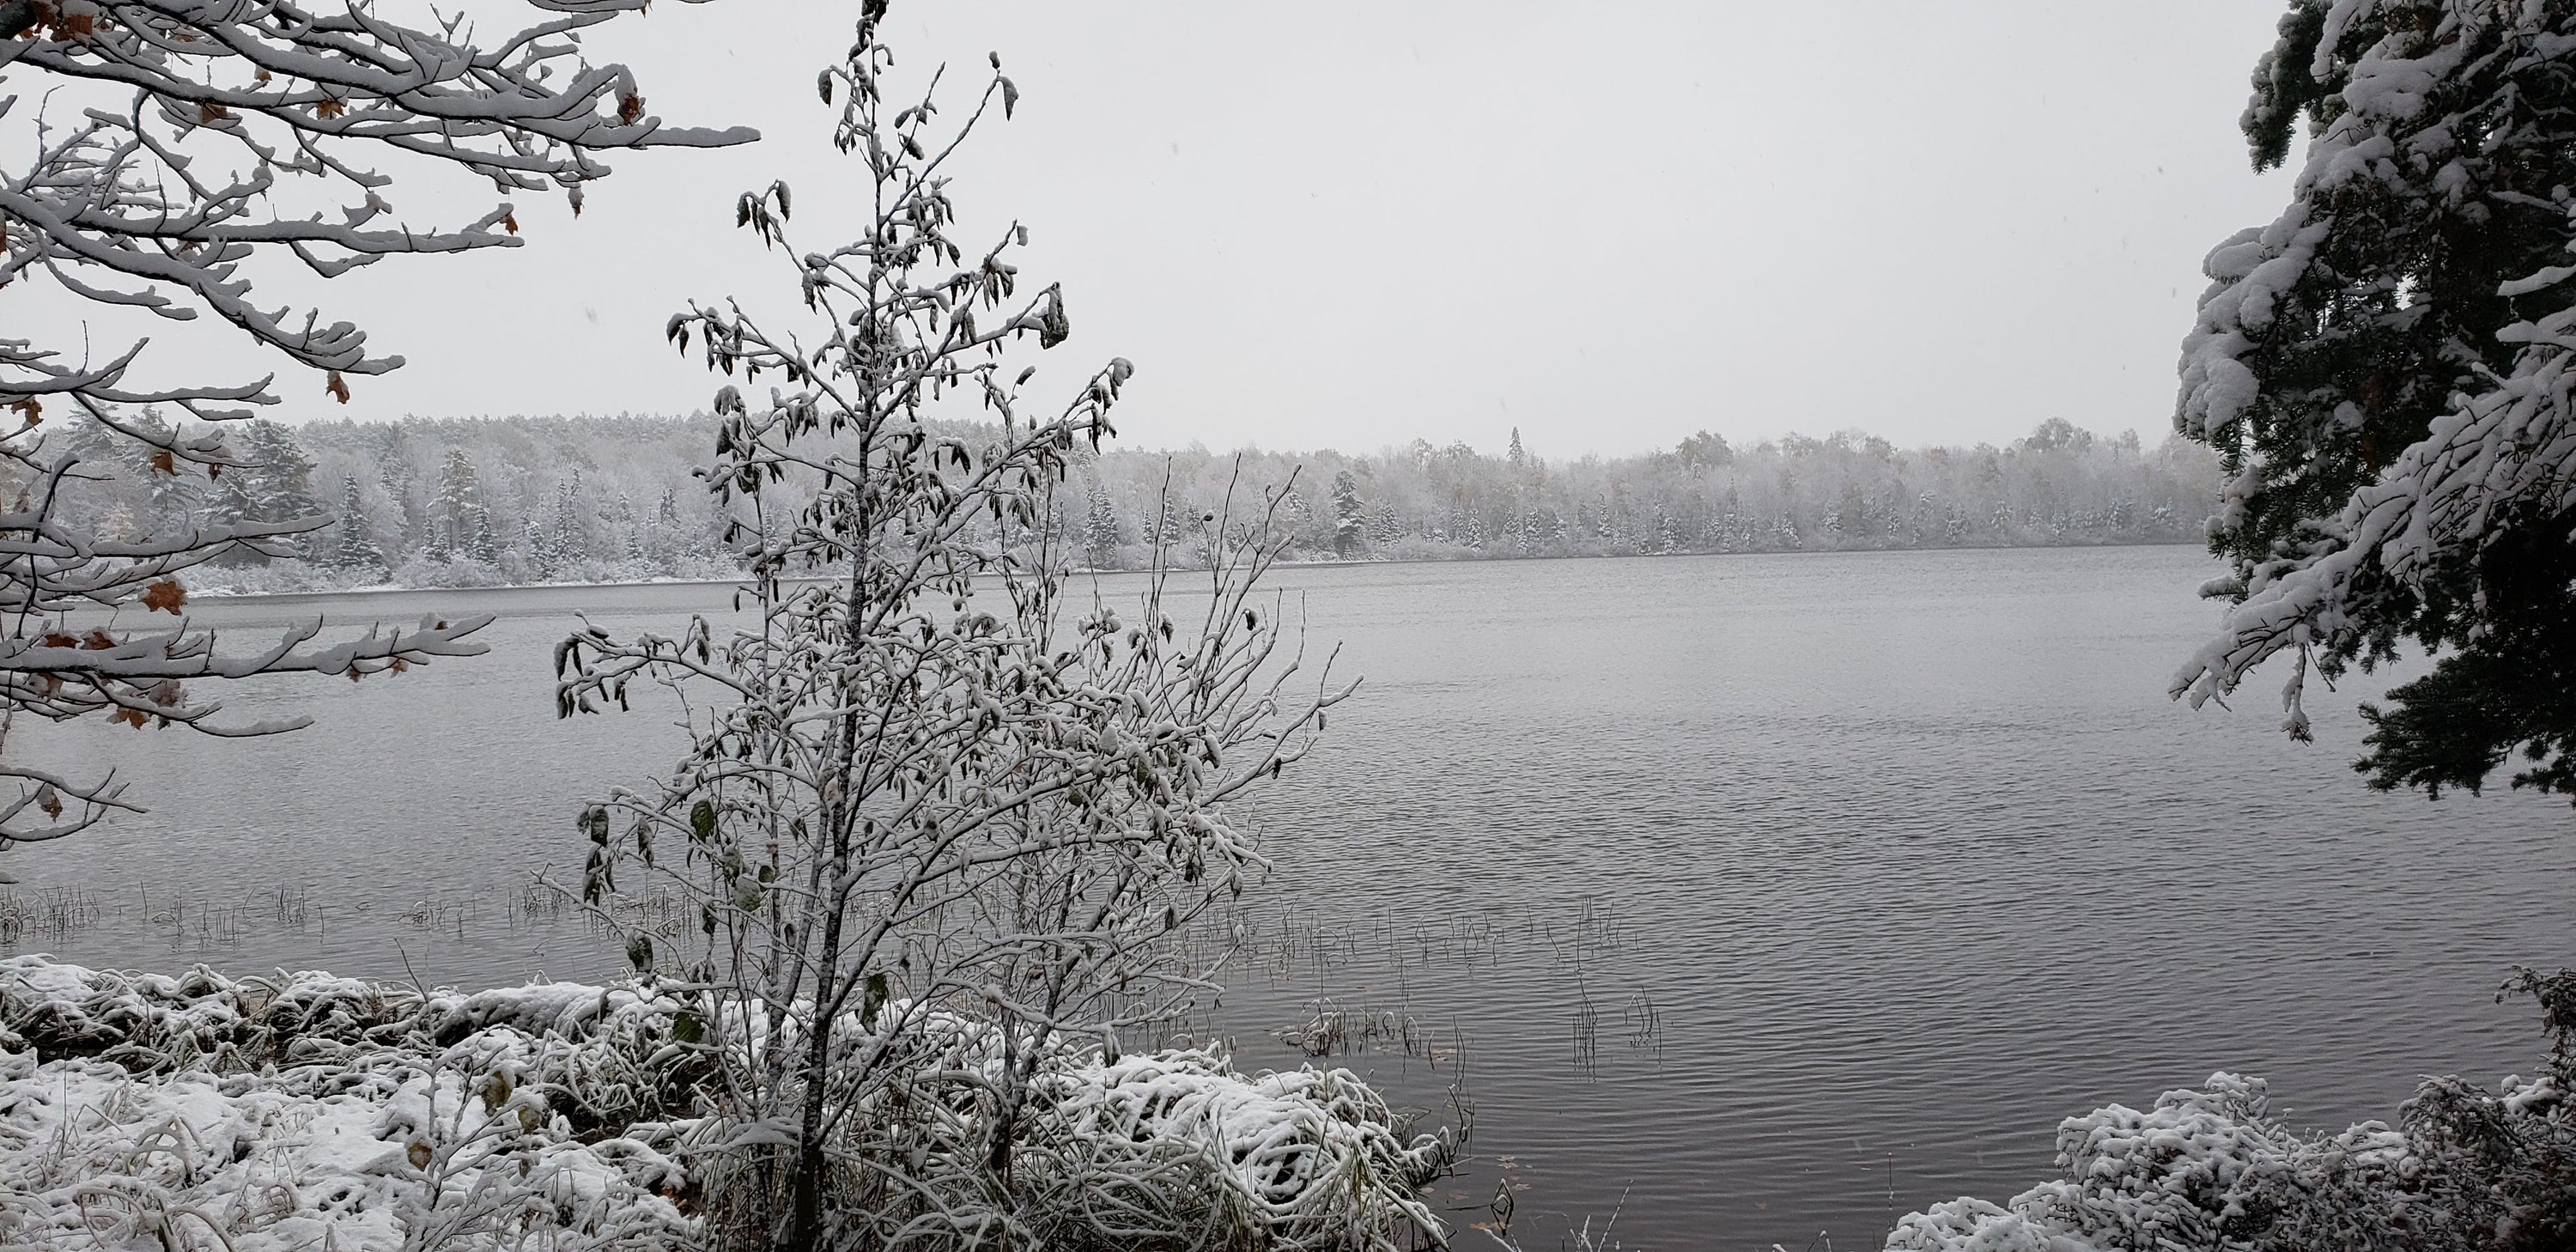 Landscape of a lake with snow on surrounding plants